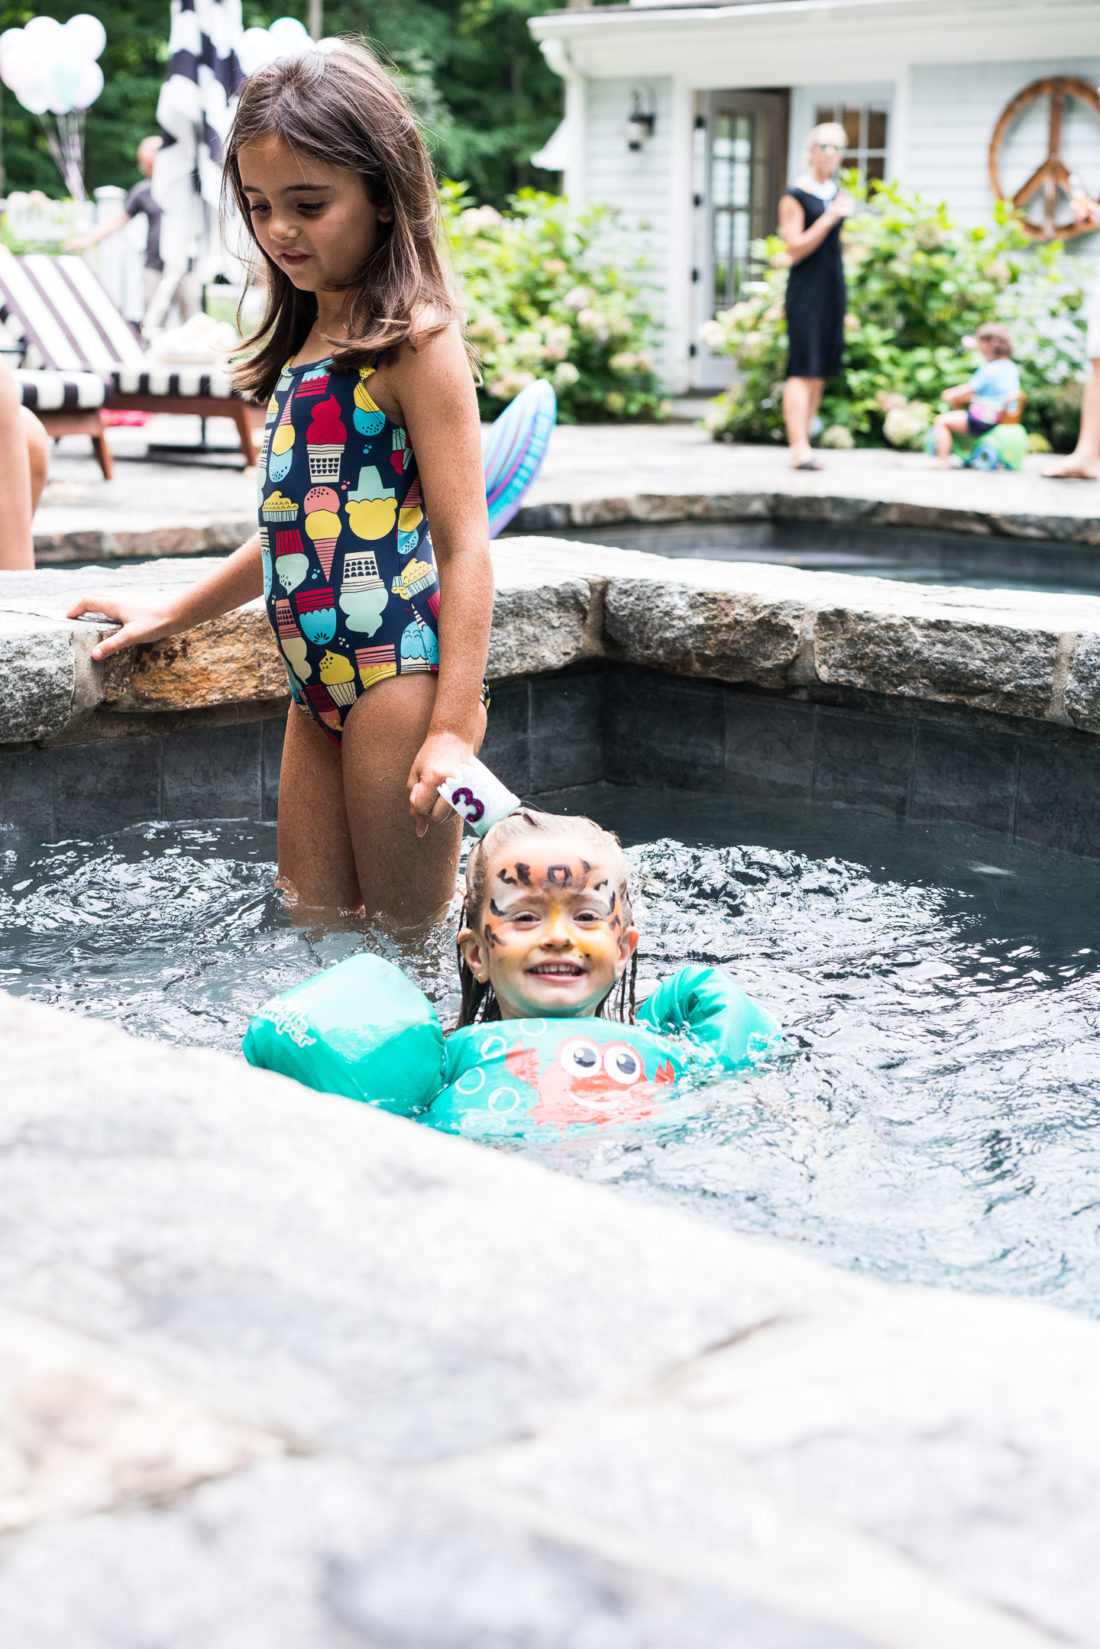 Marlowe Martino swims with friends in the hot tub at her third birthday party